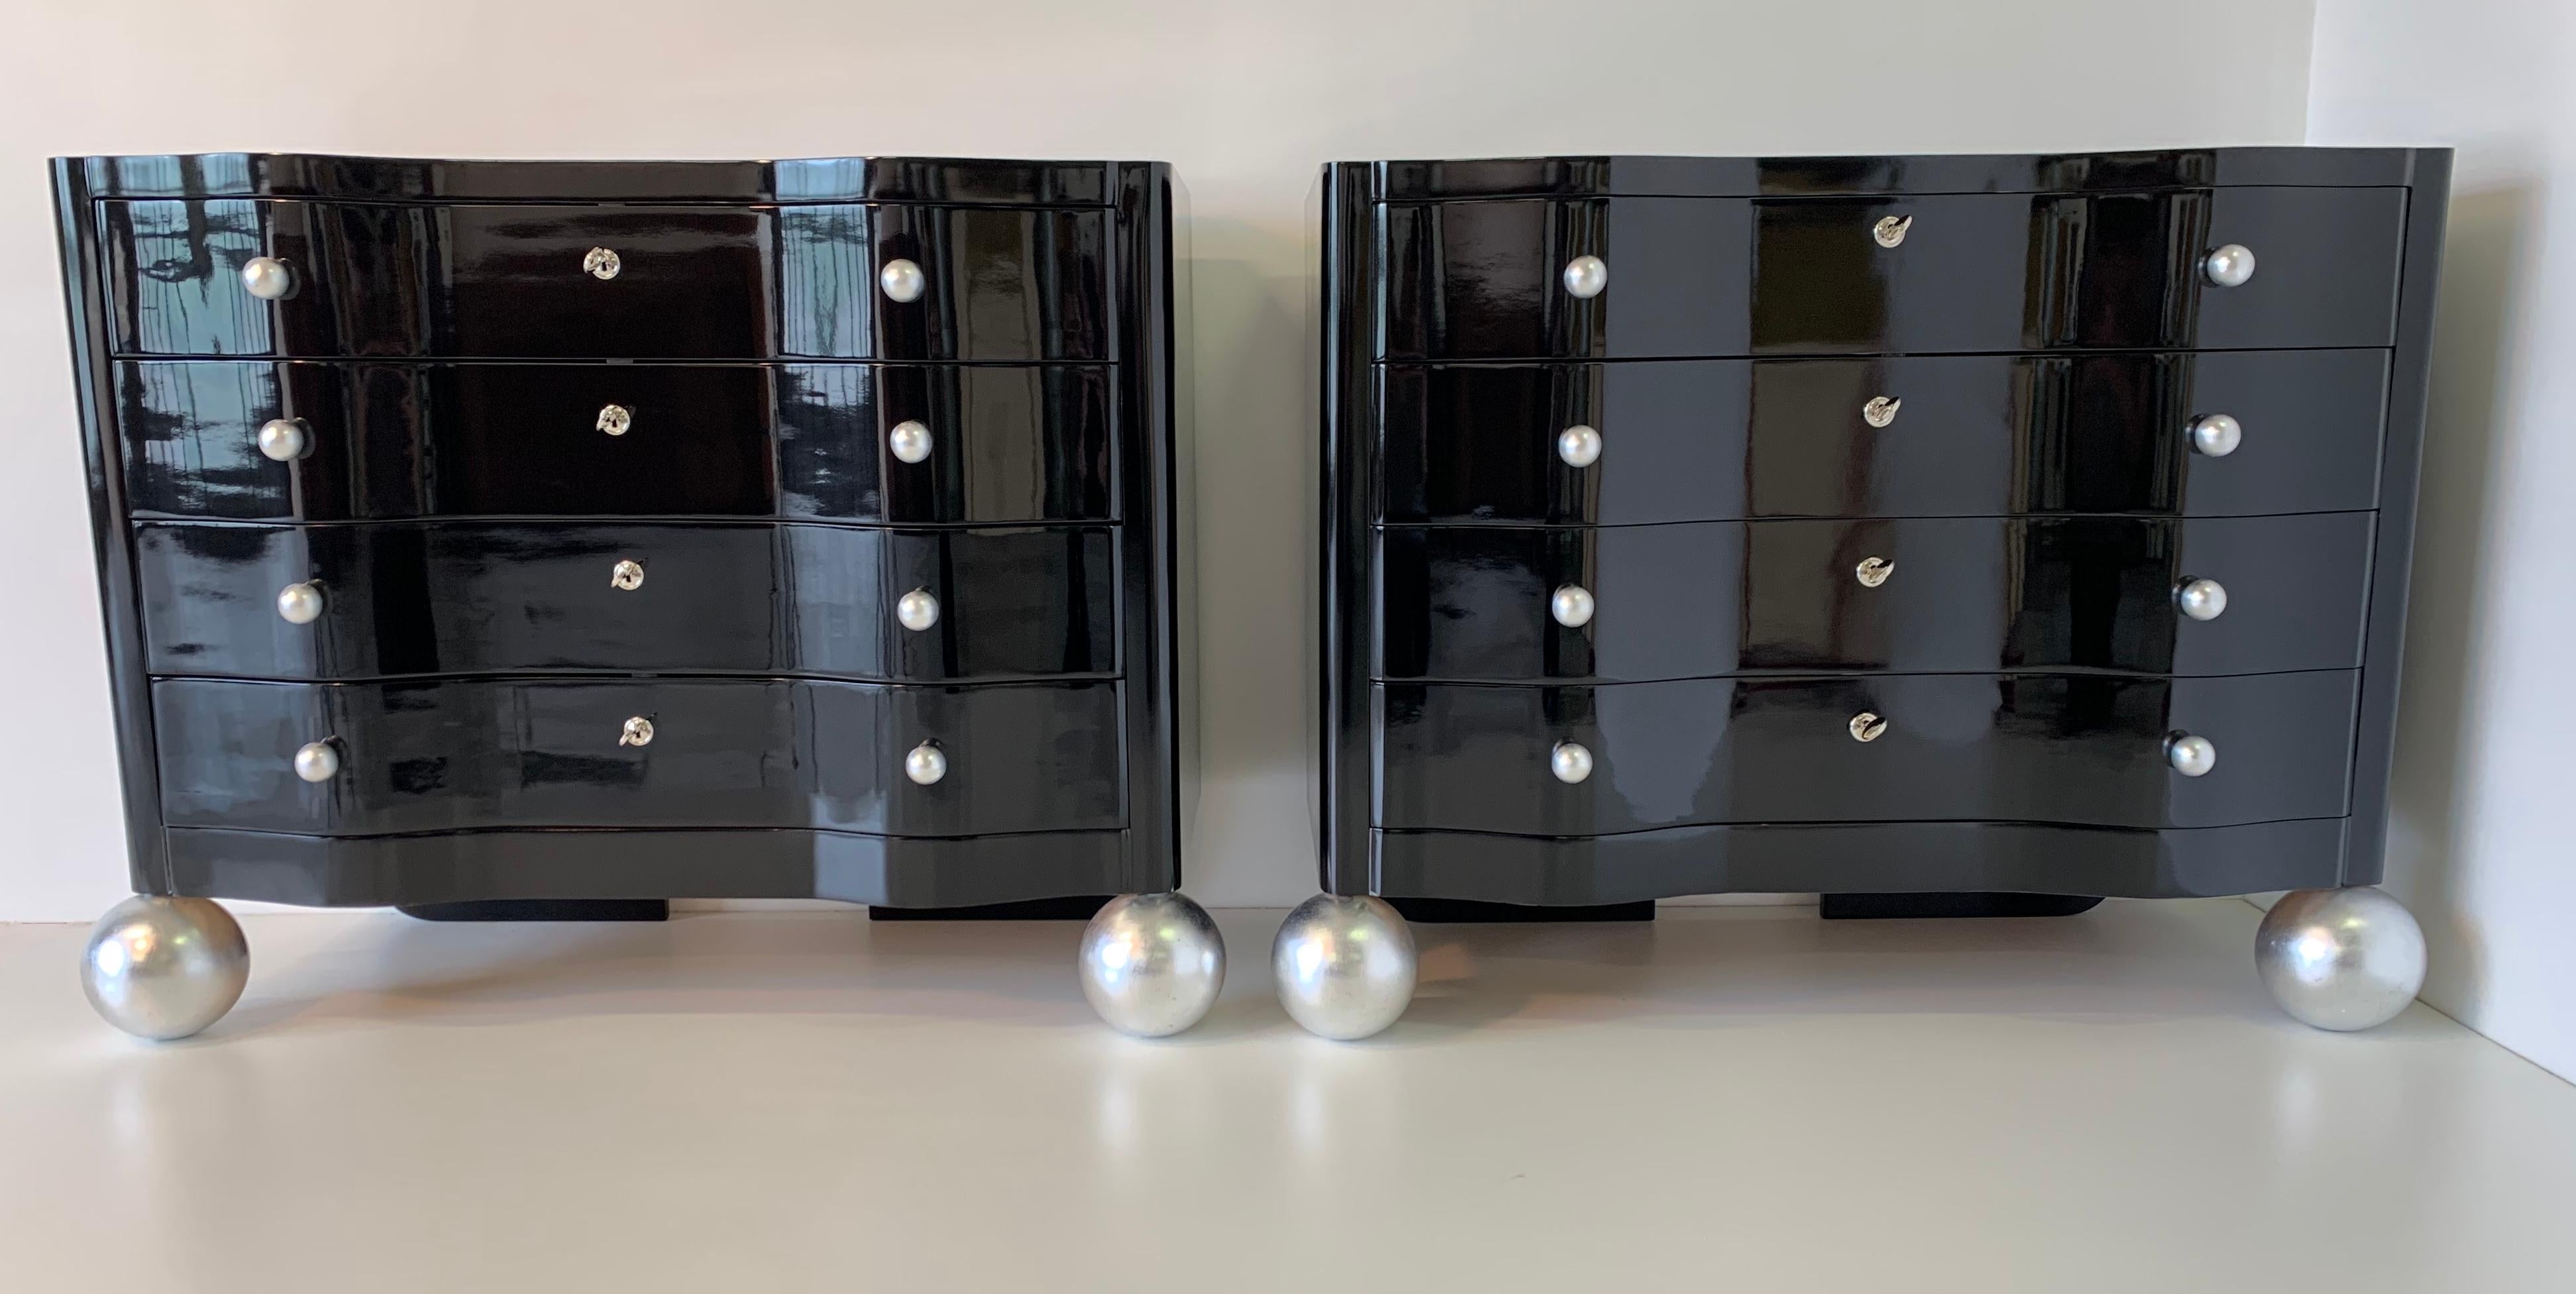 Pair of twin chest of drawers from the 1930s made in Italy.
The structure and the drawers are black lacquered while the handles and feet are in turned wood and covered with silver leaf.
The keys and details are in chromed metal.
Completely